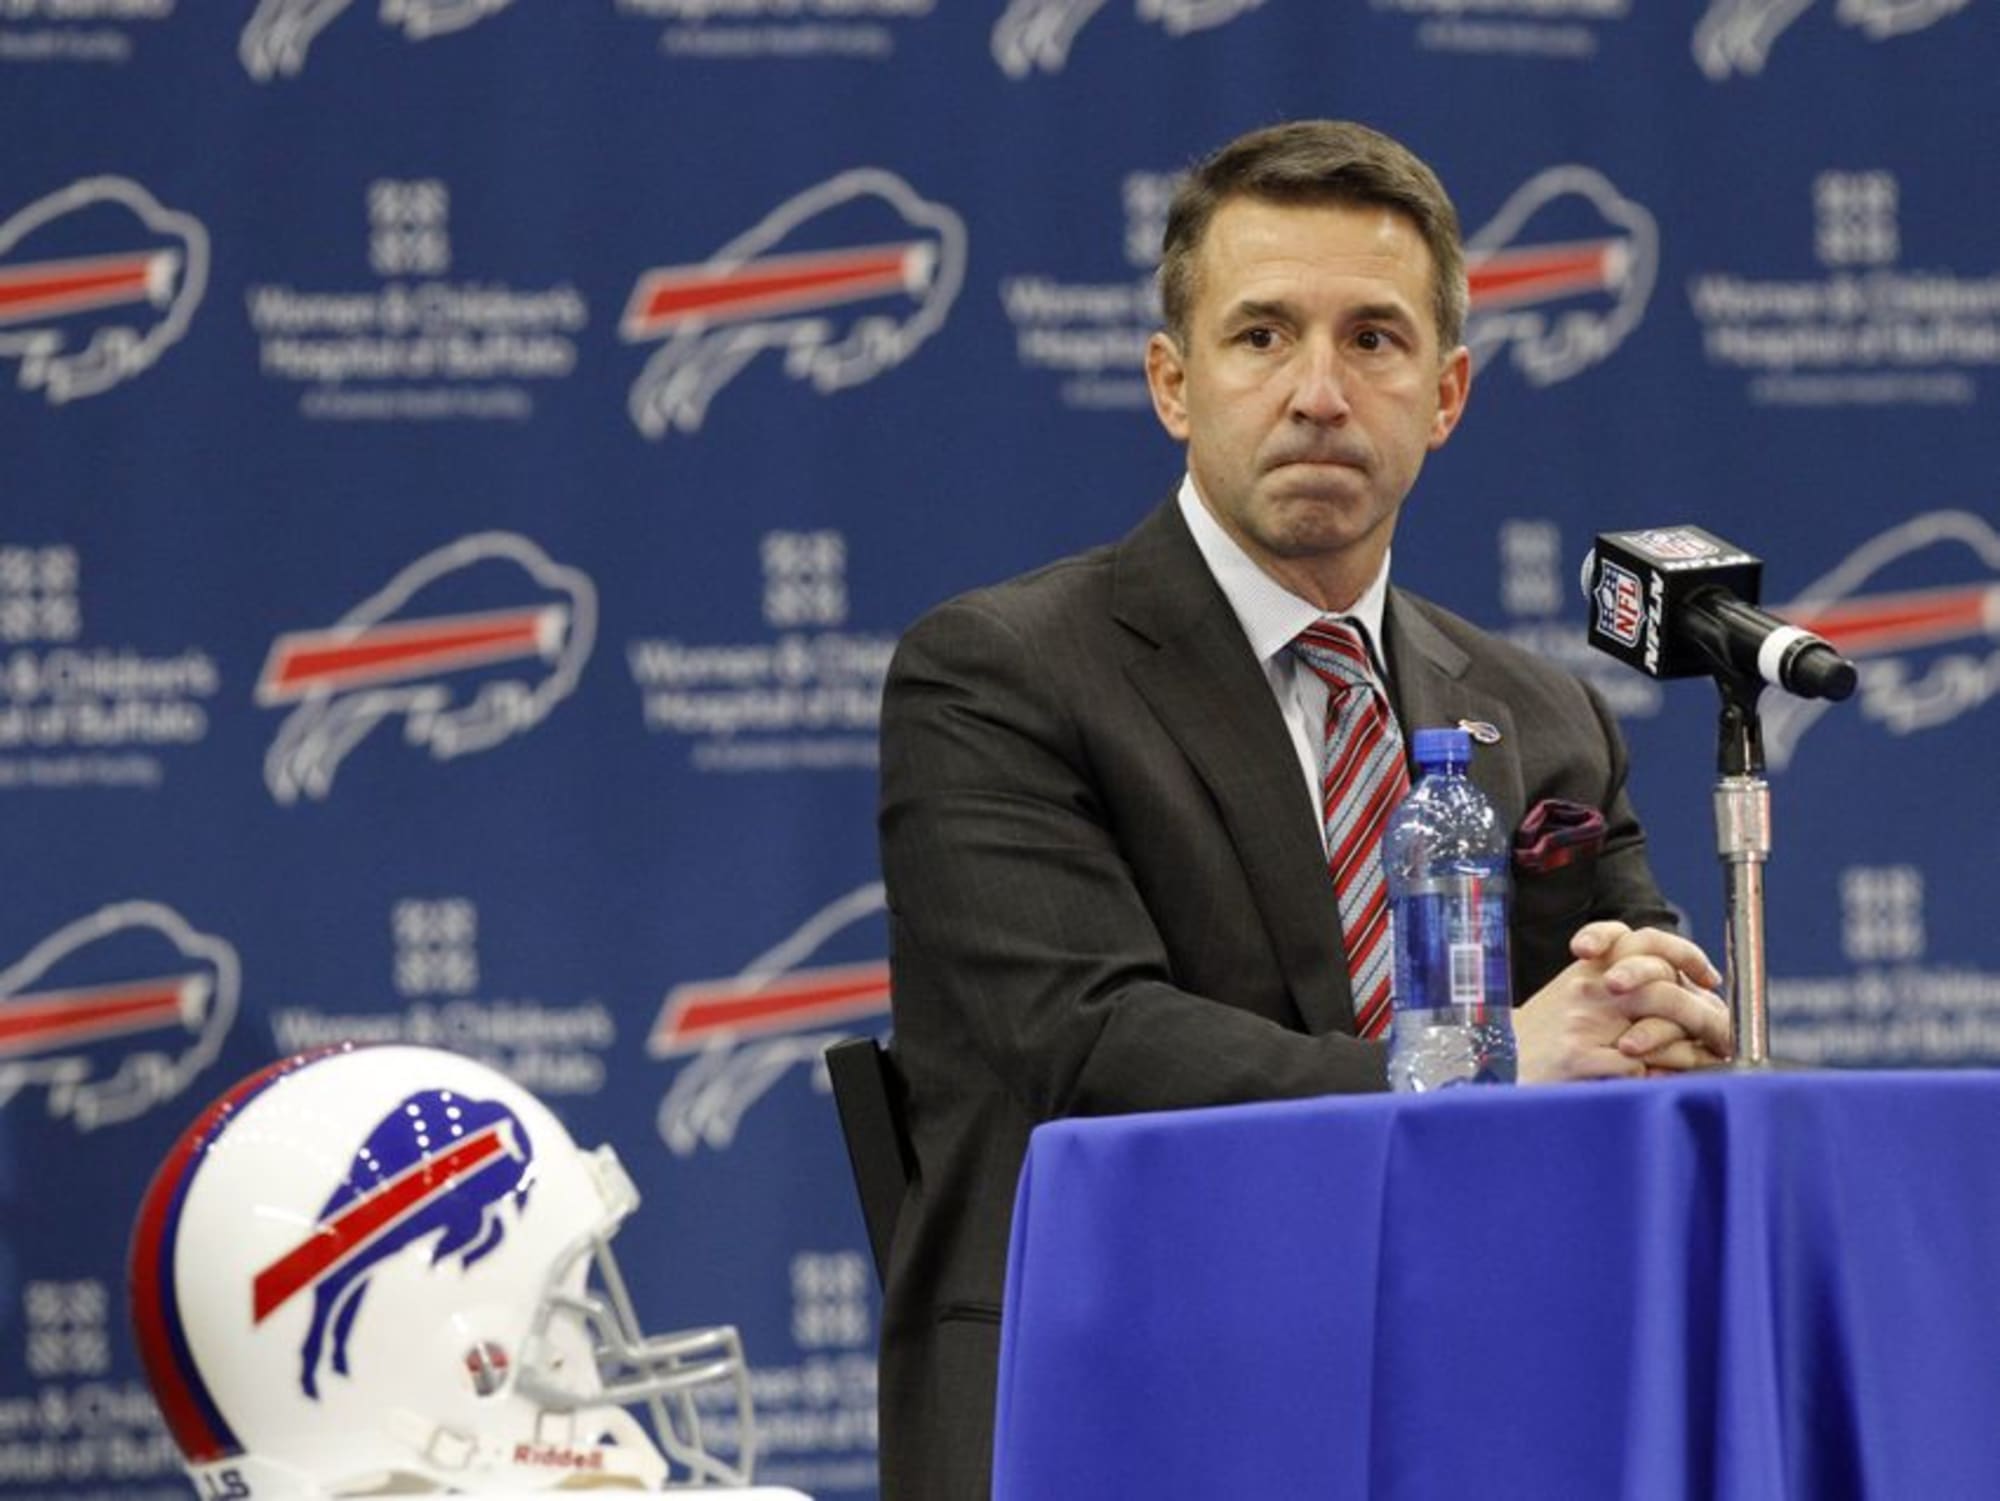 Buffalo Bills: Where Does Russ Brandon Fit into this Whole Mess?